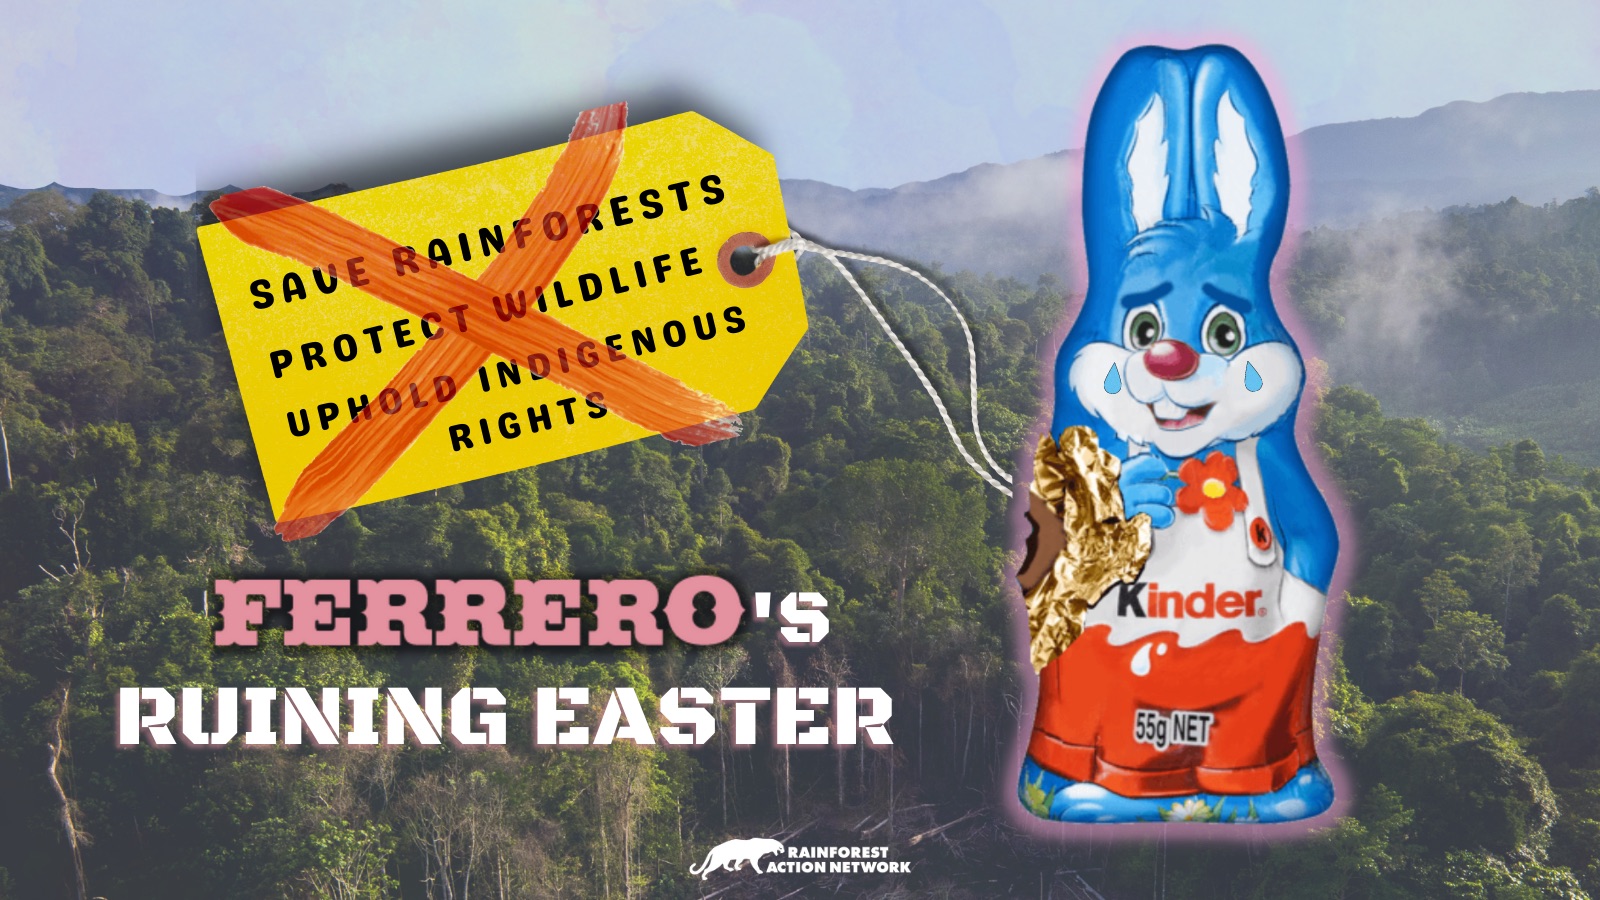 Ferrero Stop Ruining Easter For Everyone Rainforest Action Network Fighting For People And